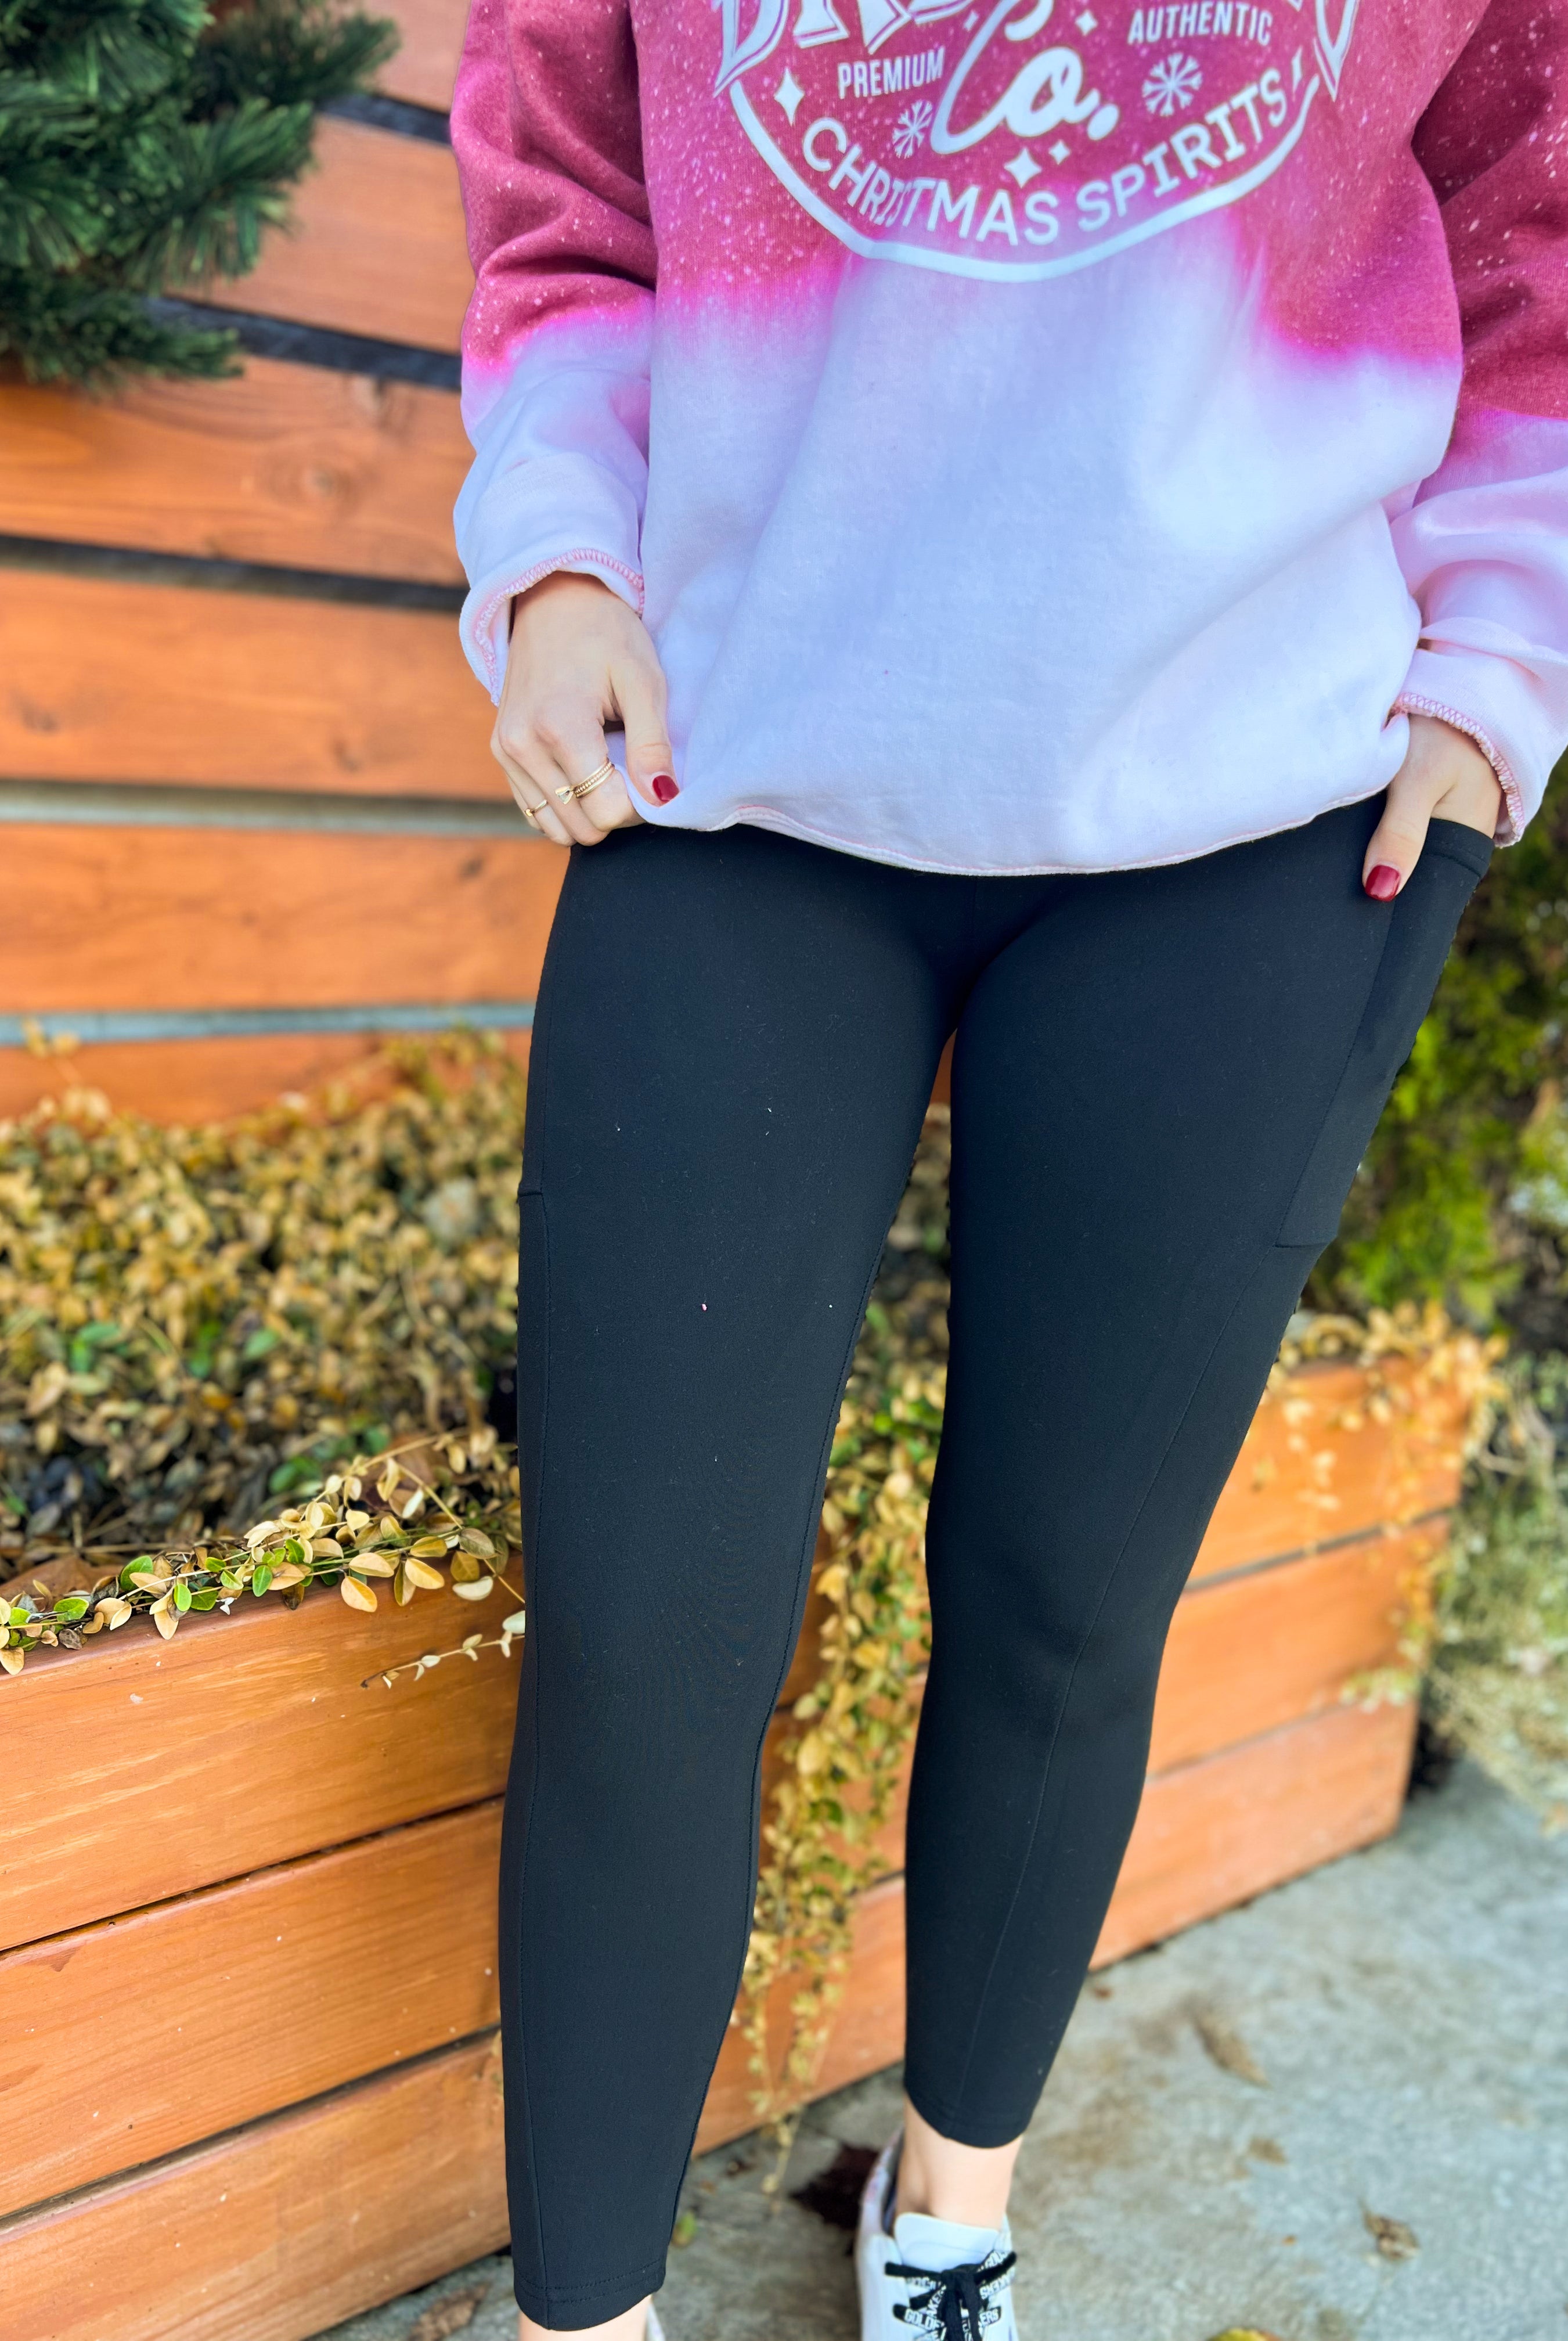 Living in These Fleece Lined Leggings-Leggings-The Lovely Closet-The Lovely Closet, Women's Fashion Boutique in Alexandria, KY